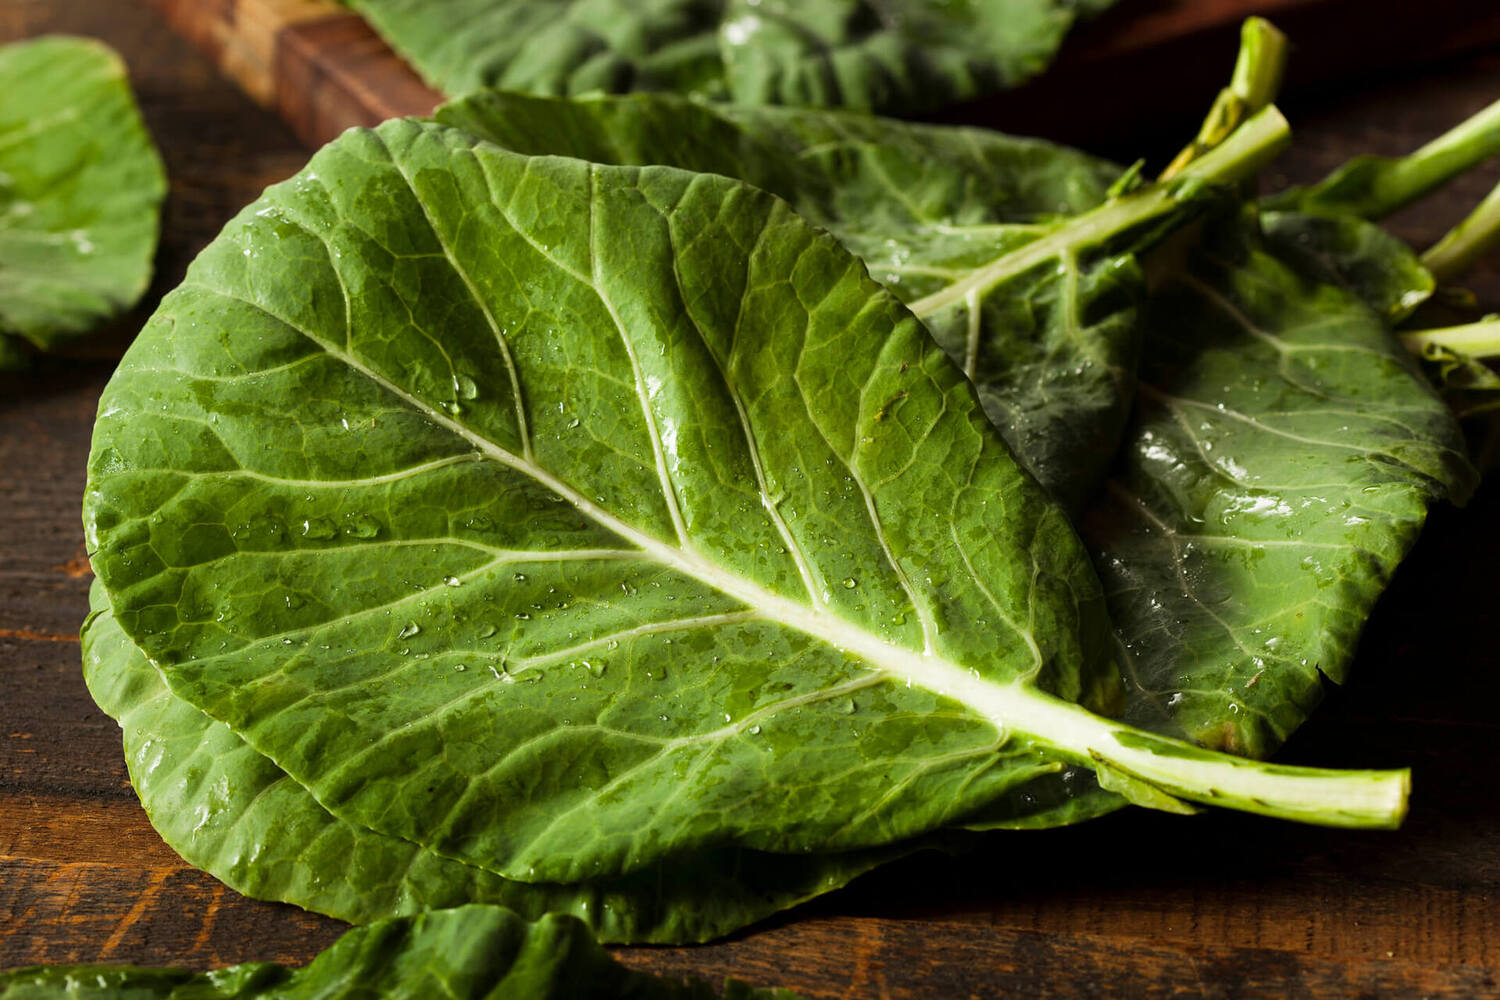 How To Store Collard Greens Before Cooking